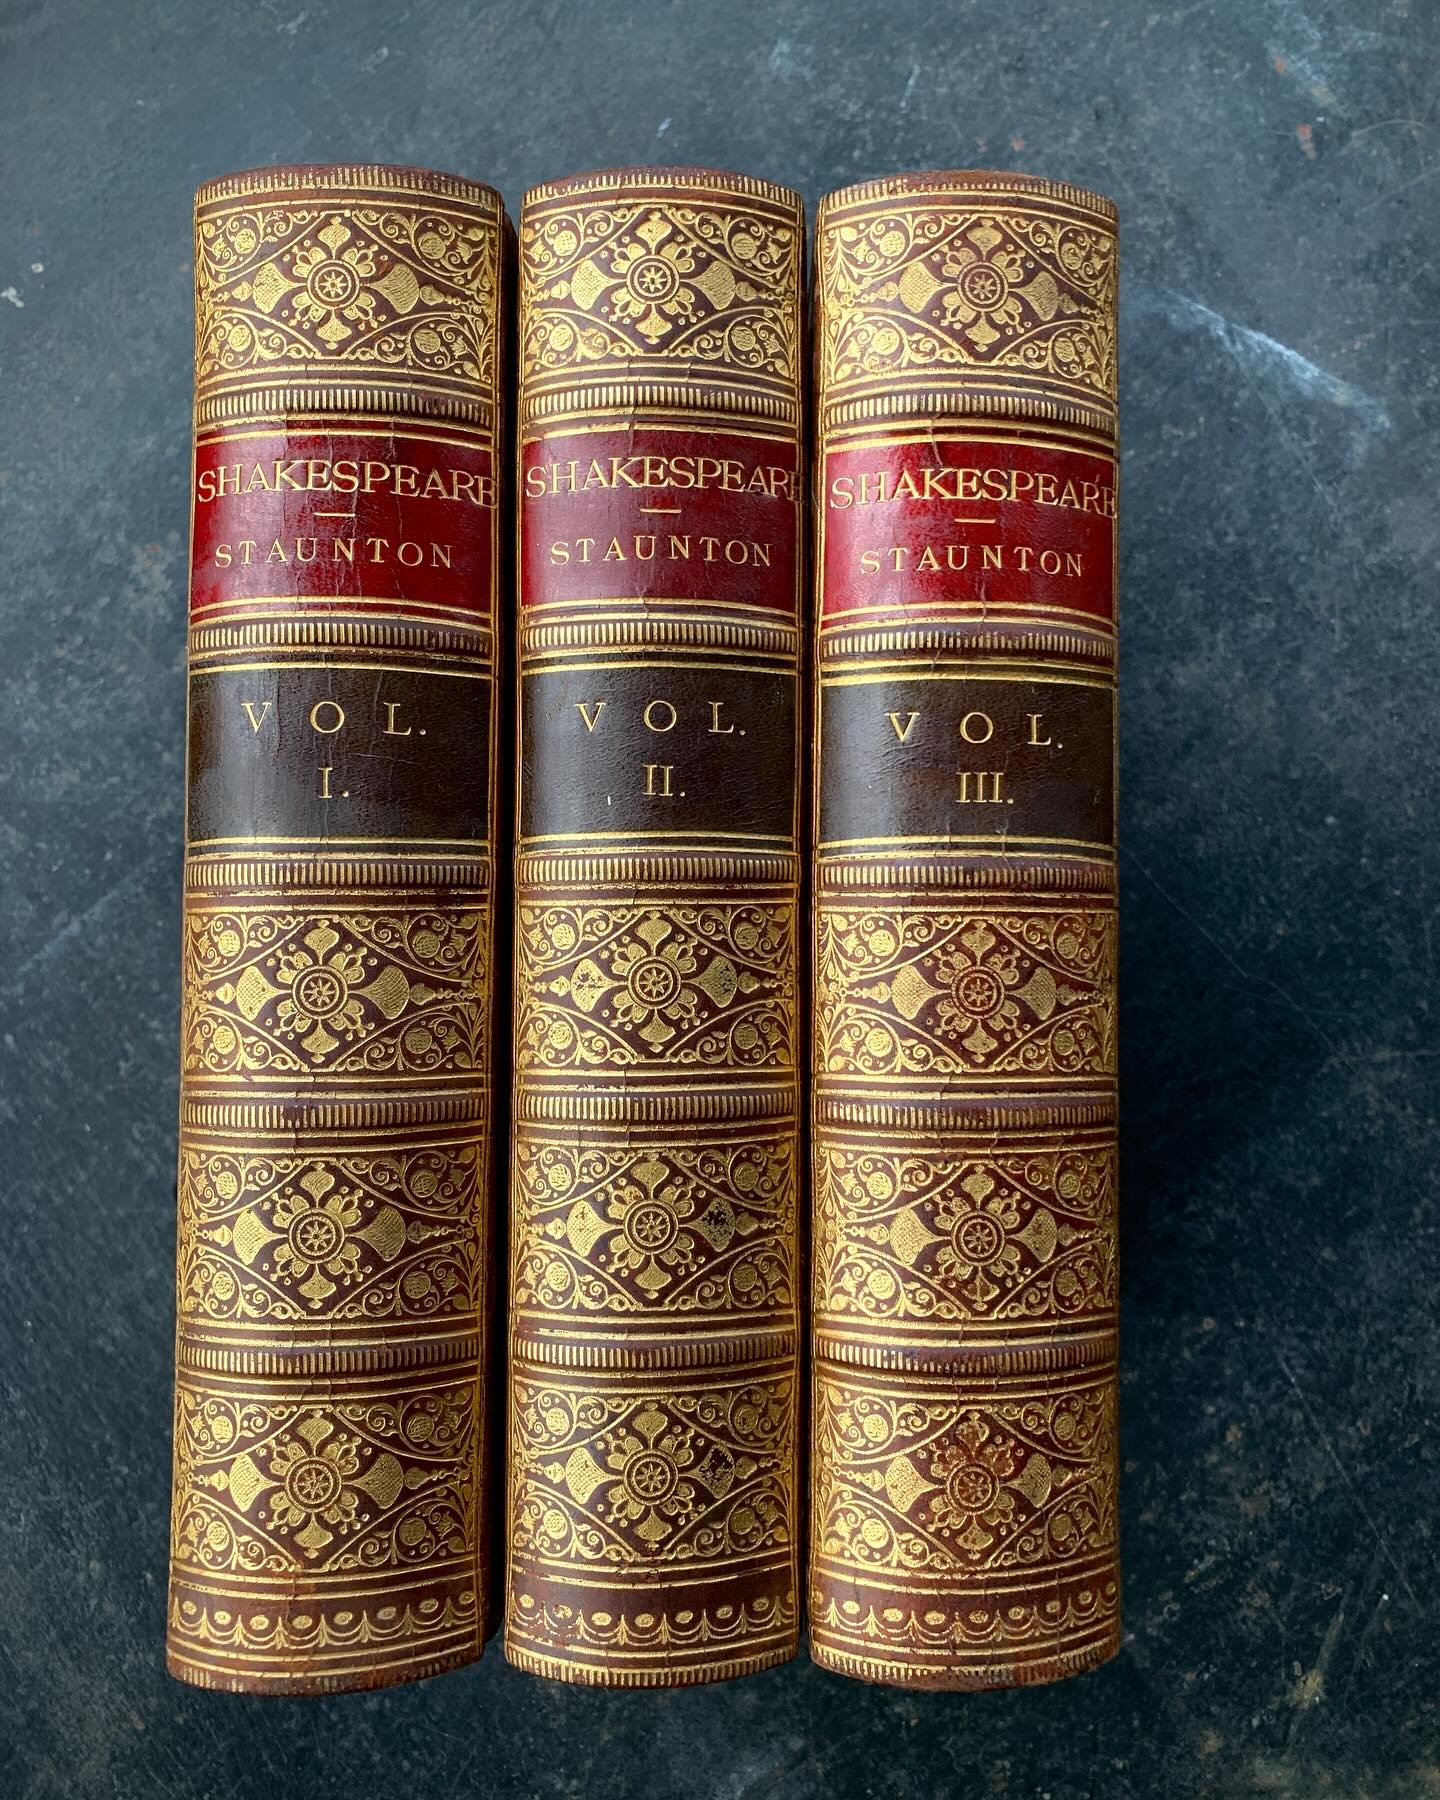 1858, full Morocco Bound 3 volume set of Shakespeare, edited by Howard Staunton. You won&rsquo;t find a better set, gorgeous set of books.
#shakespeare 
#shakespearequotes 
#antiquarianbooks 
#antiquarianbookshop 
#rarebooks
#thebard
#leatherboundboo